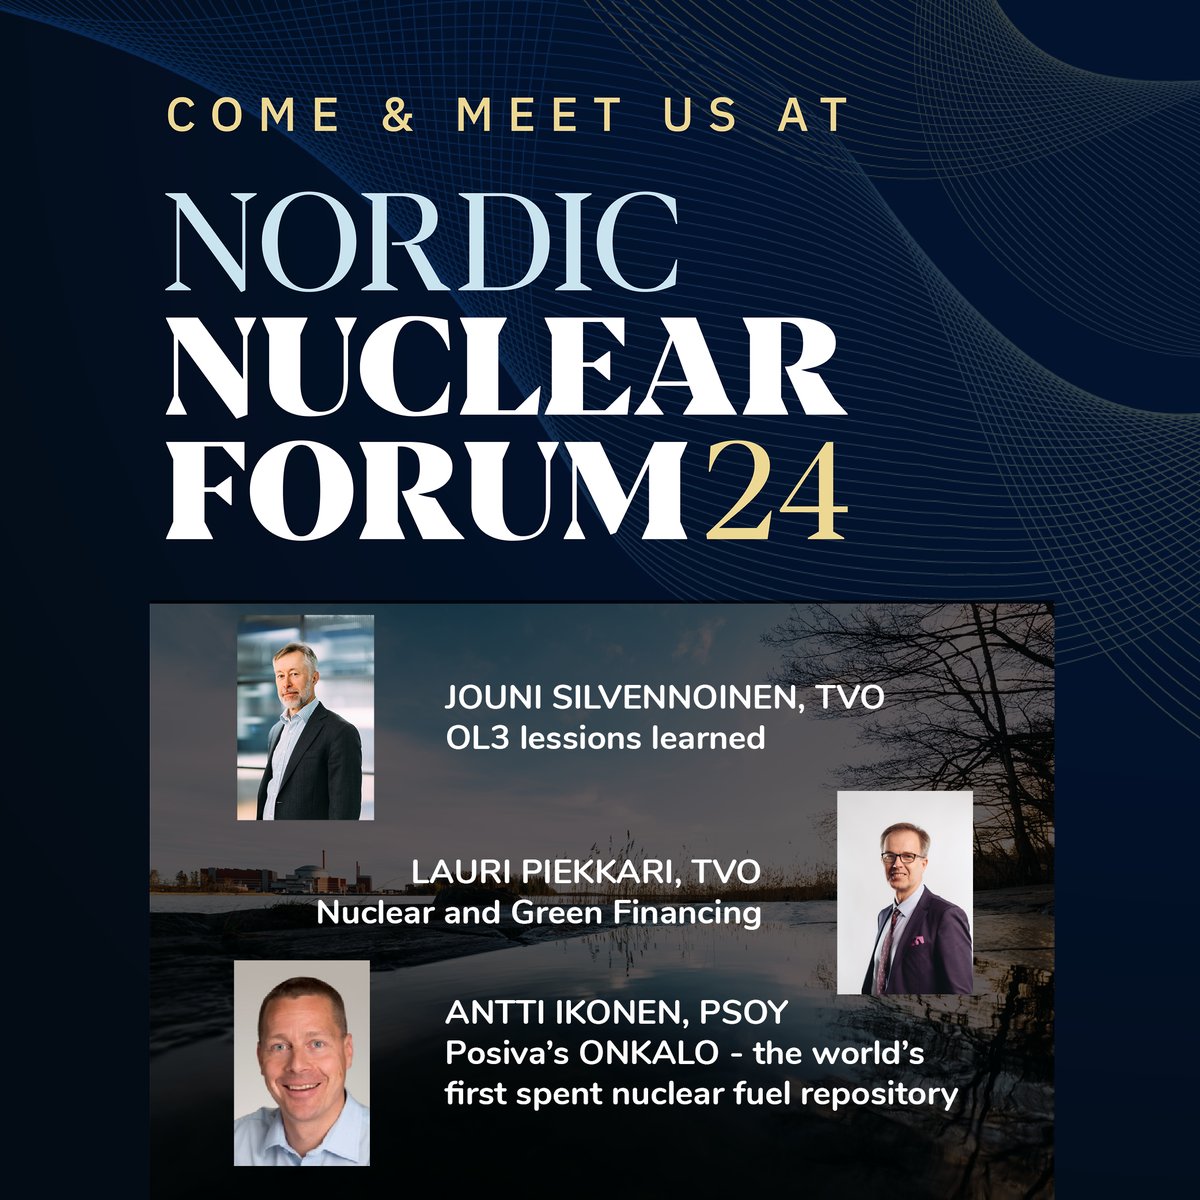 We are at @nordicnuclearf1 on the 21st and 22nd of May. See you there! Day 1 - Jouni Silvennoinen and Antti Ikonen Day 2 - Lauri Piekkari